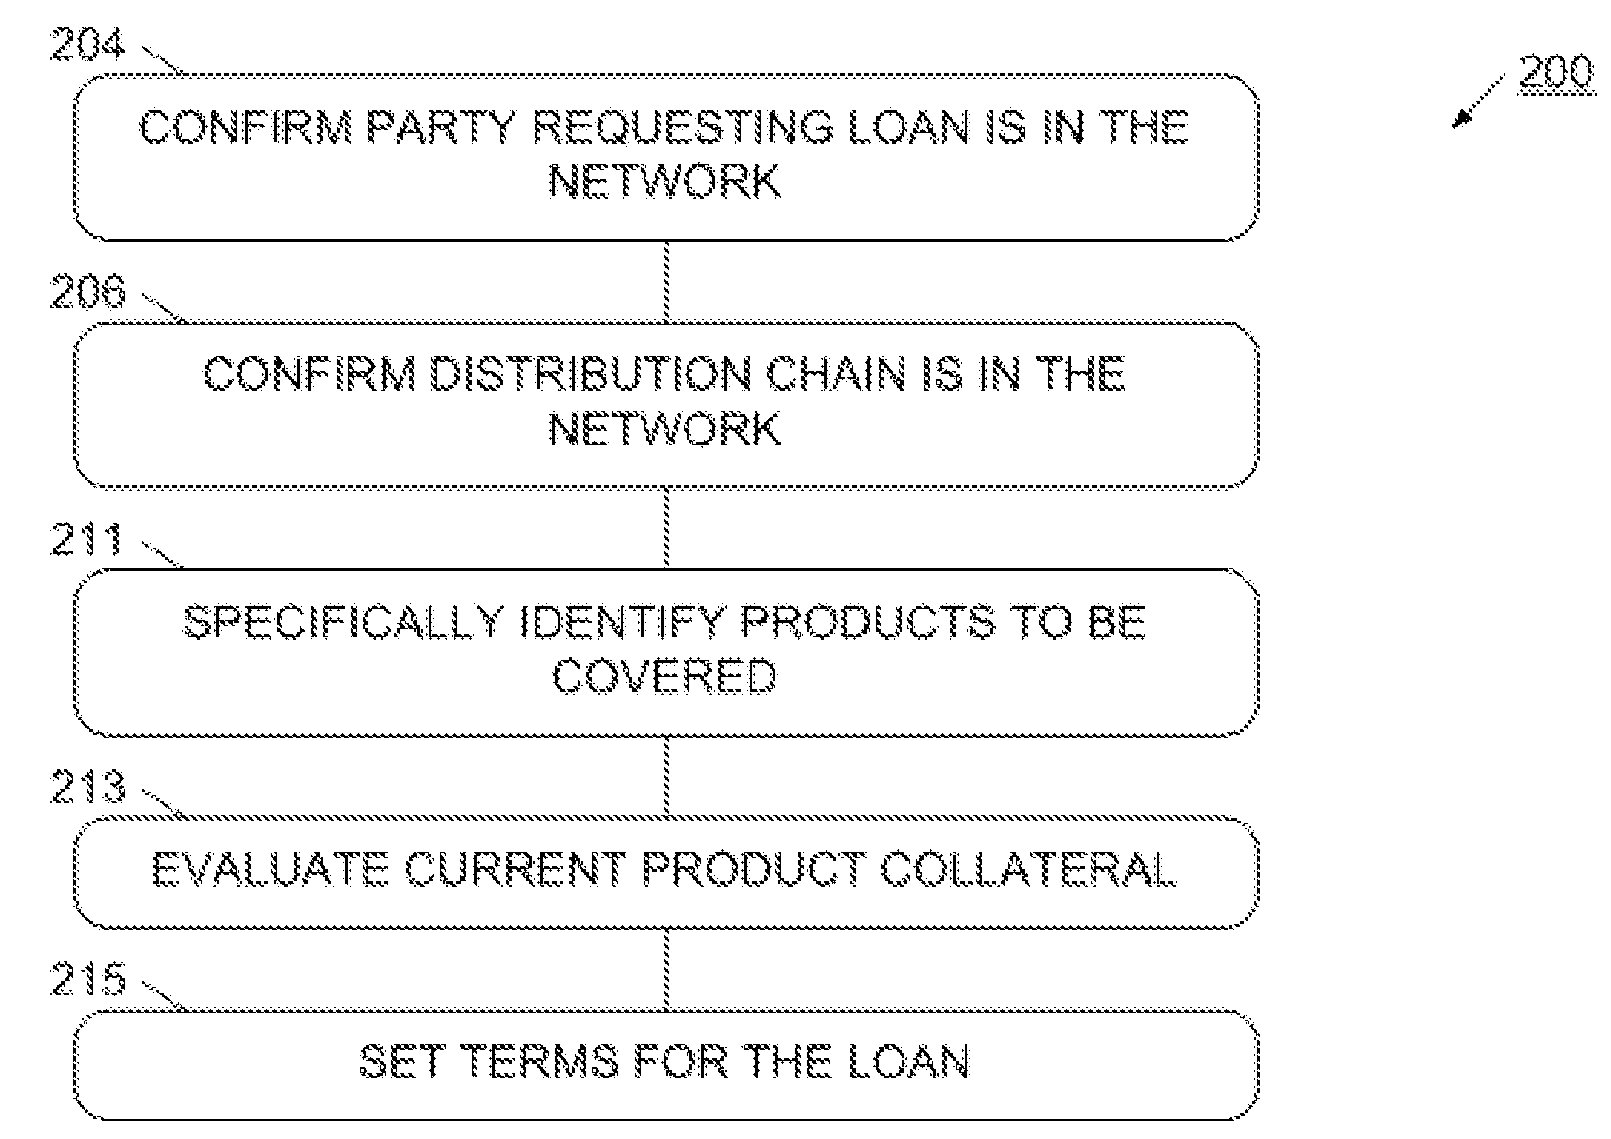 System and process for providing loans or other financing instruments